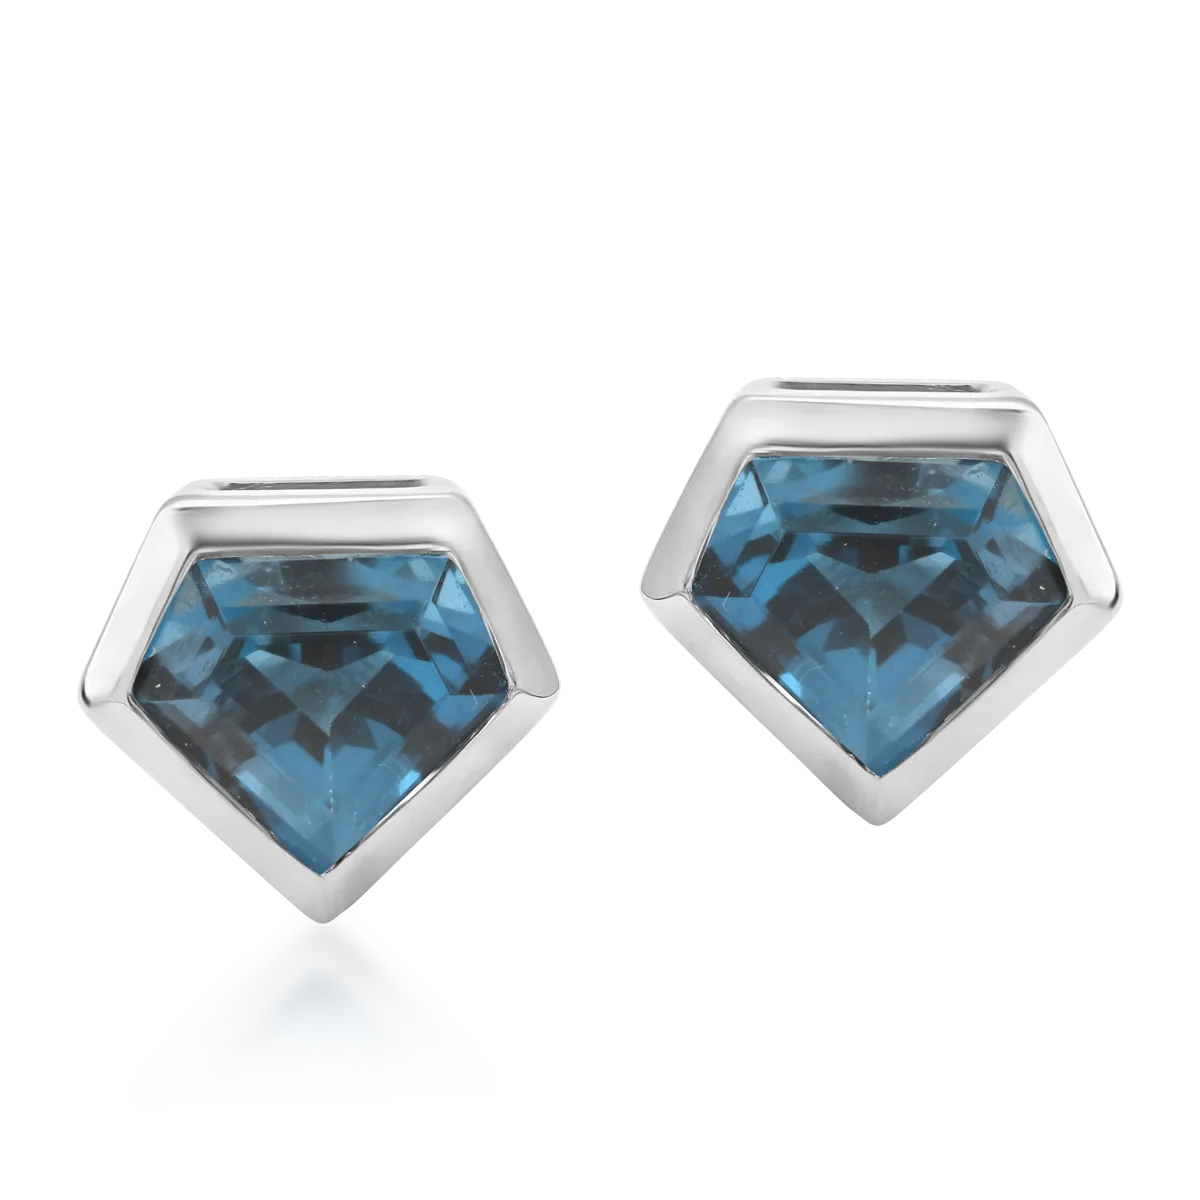 18K white gold earrings with 1.426ct london blue topaz